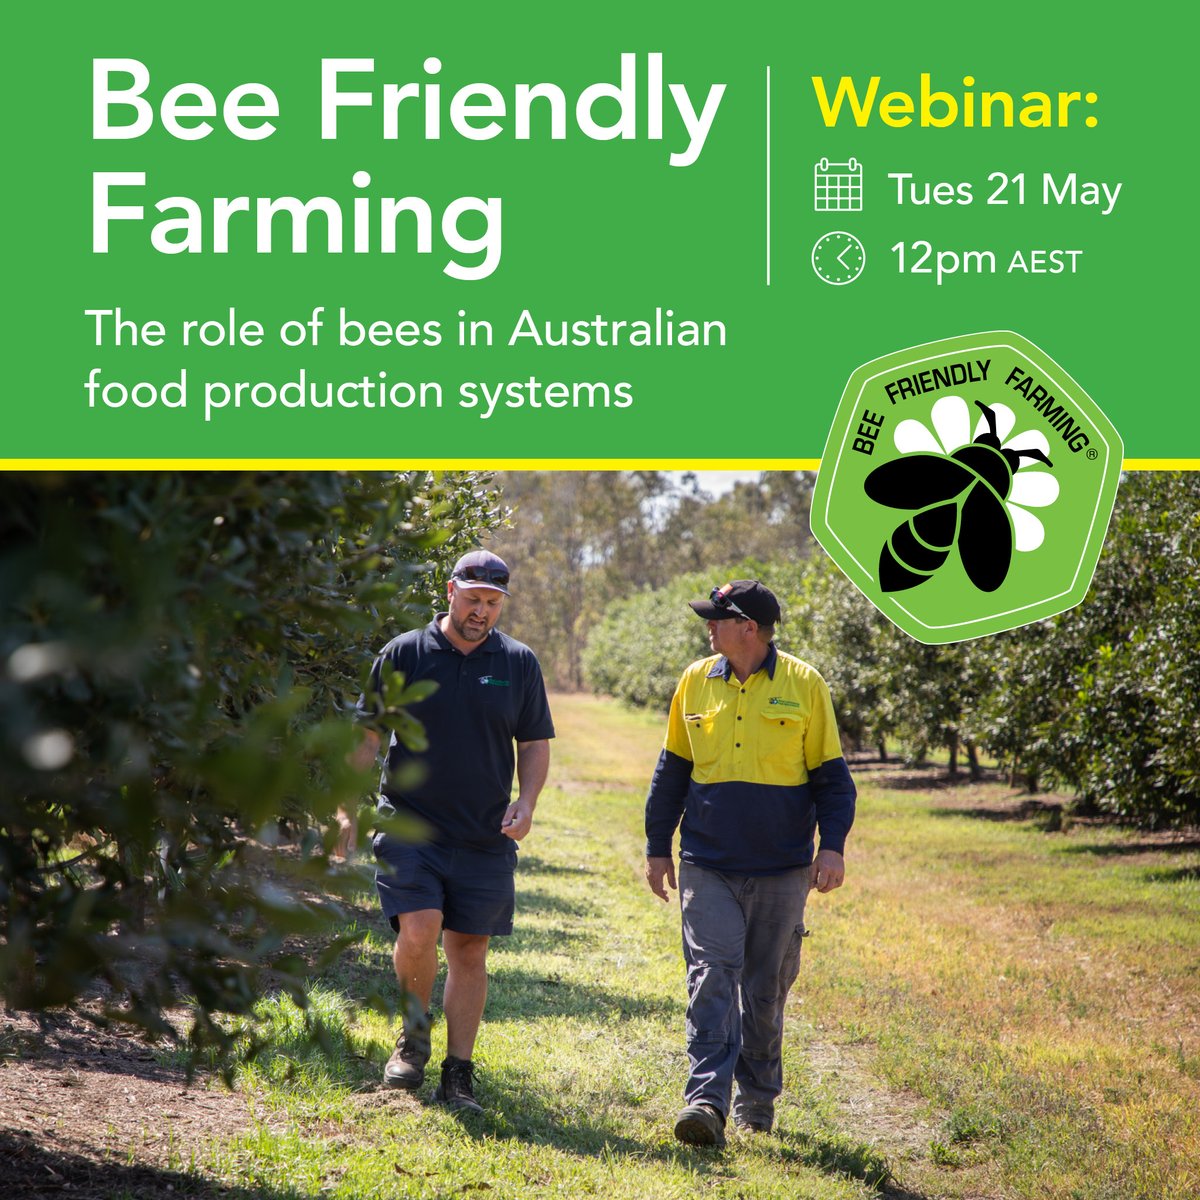 In this free webinar, discover the vital role bees play in Australia's food production systems, with case studies on the role of bees in carrot seed production and native bee pollination of berry crops. The webinar is on Tues 21 May at 12pm AEST. Info at bit.ly/3wlqFR3